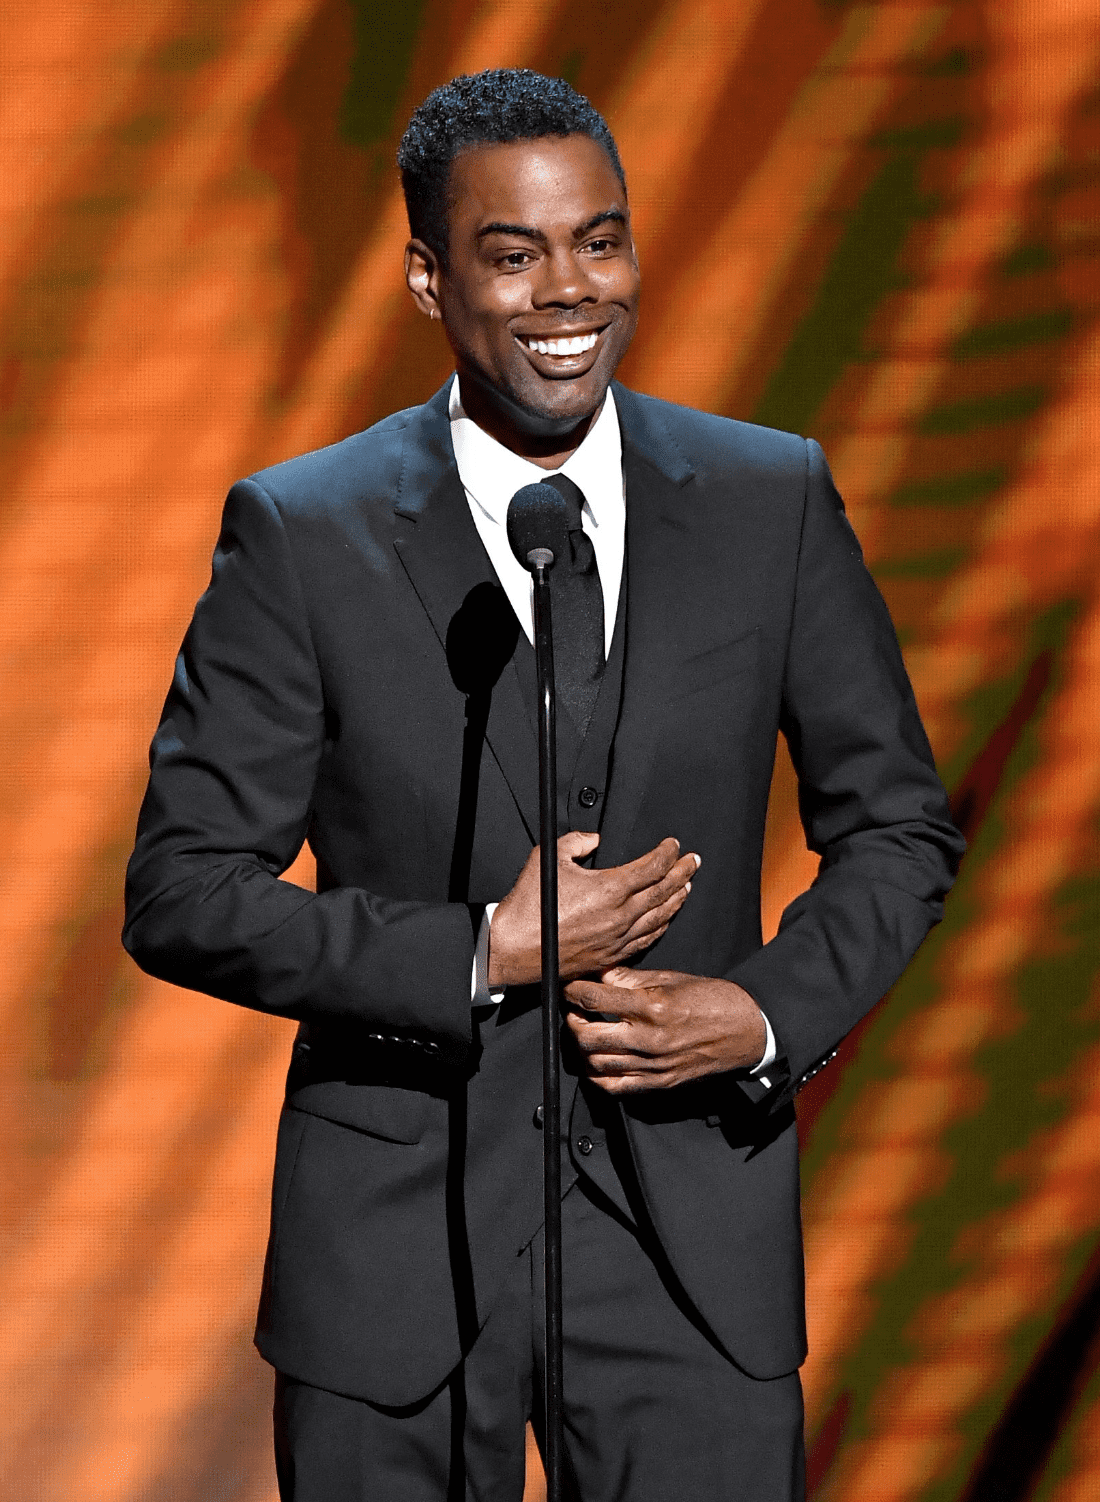 Chris Rock at the 50th NAACP Image Awards at Dolby Theatre on March 30, 2019 in Hollywood, California. | Source: Getty Images